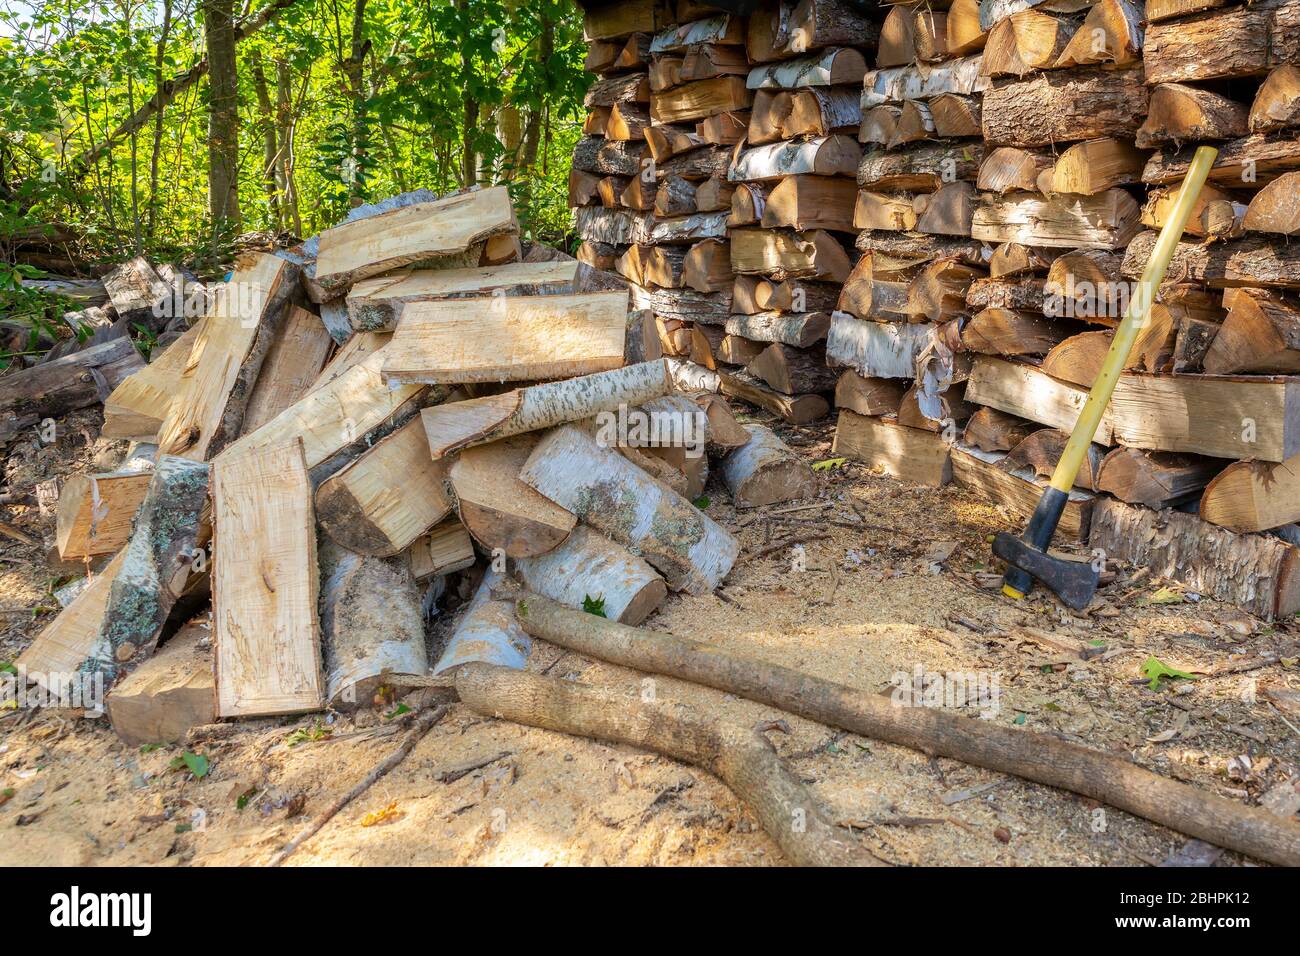 A heap of partially split wood next to a neatly stacked woodpile. An axe leaning against the stack. Sunny day, but in the shade. Forest in the backgro Stock Photo